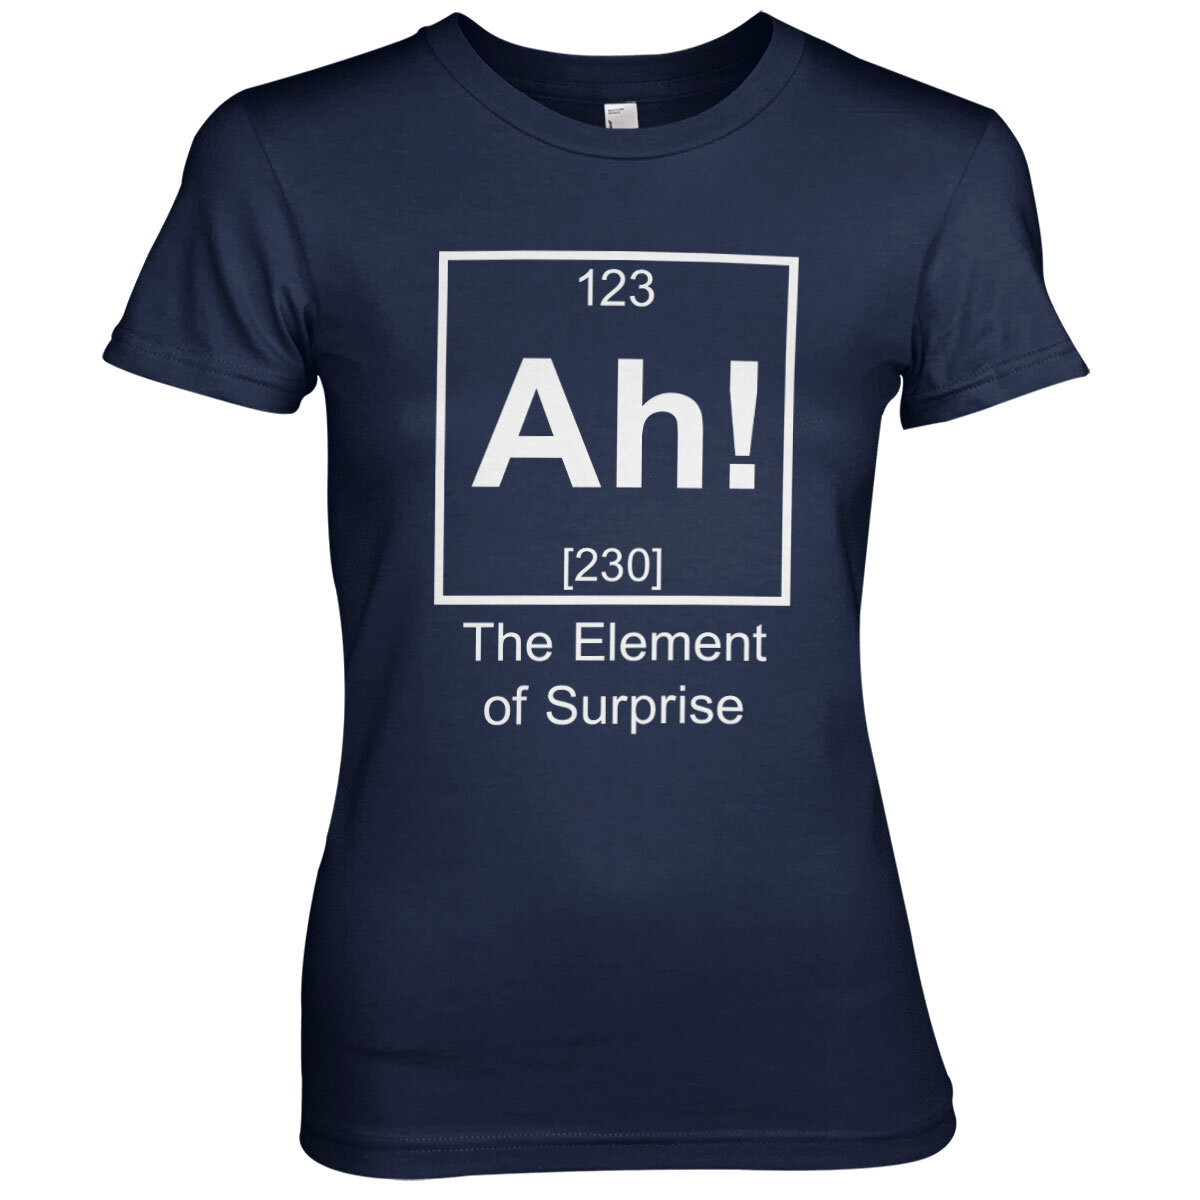 Ah! The Element Of Surprise Girly Tee